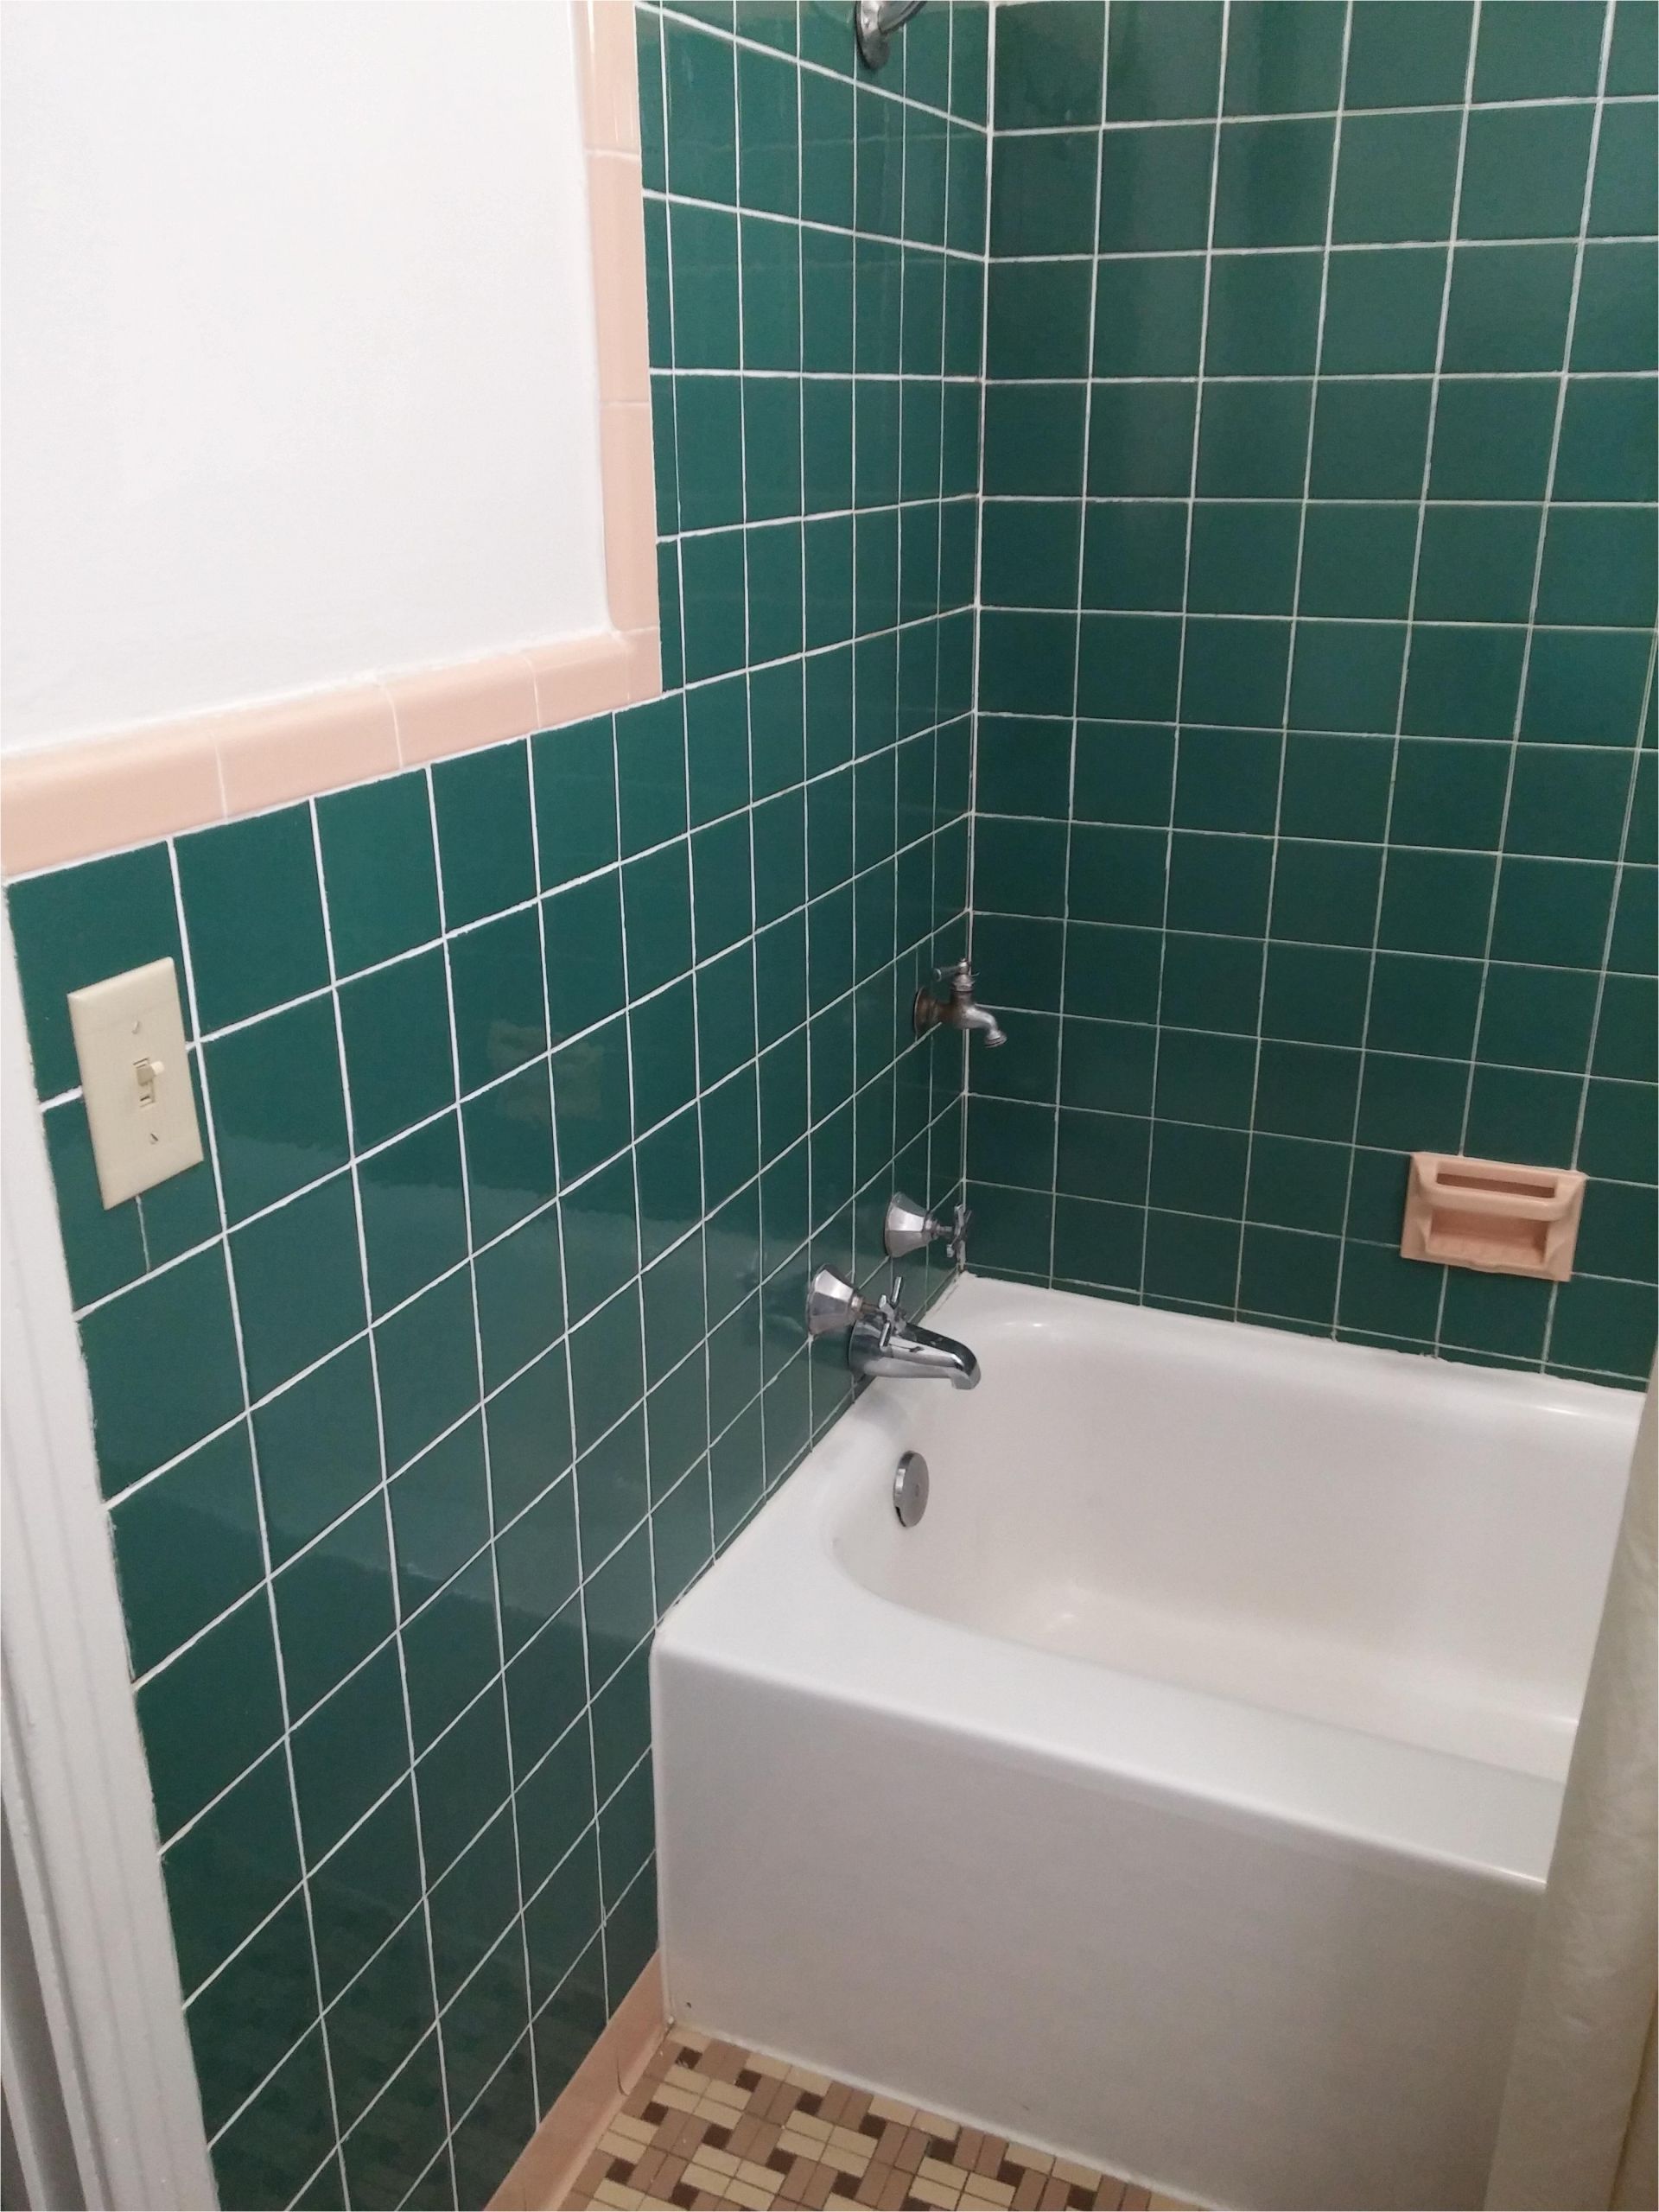 my bathtub alcoves are 58 wide because of tiling